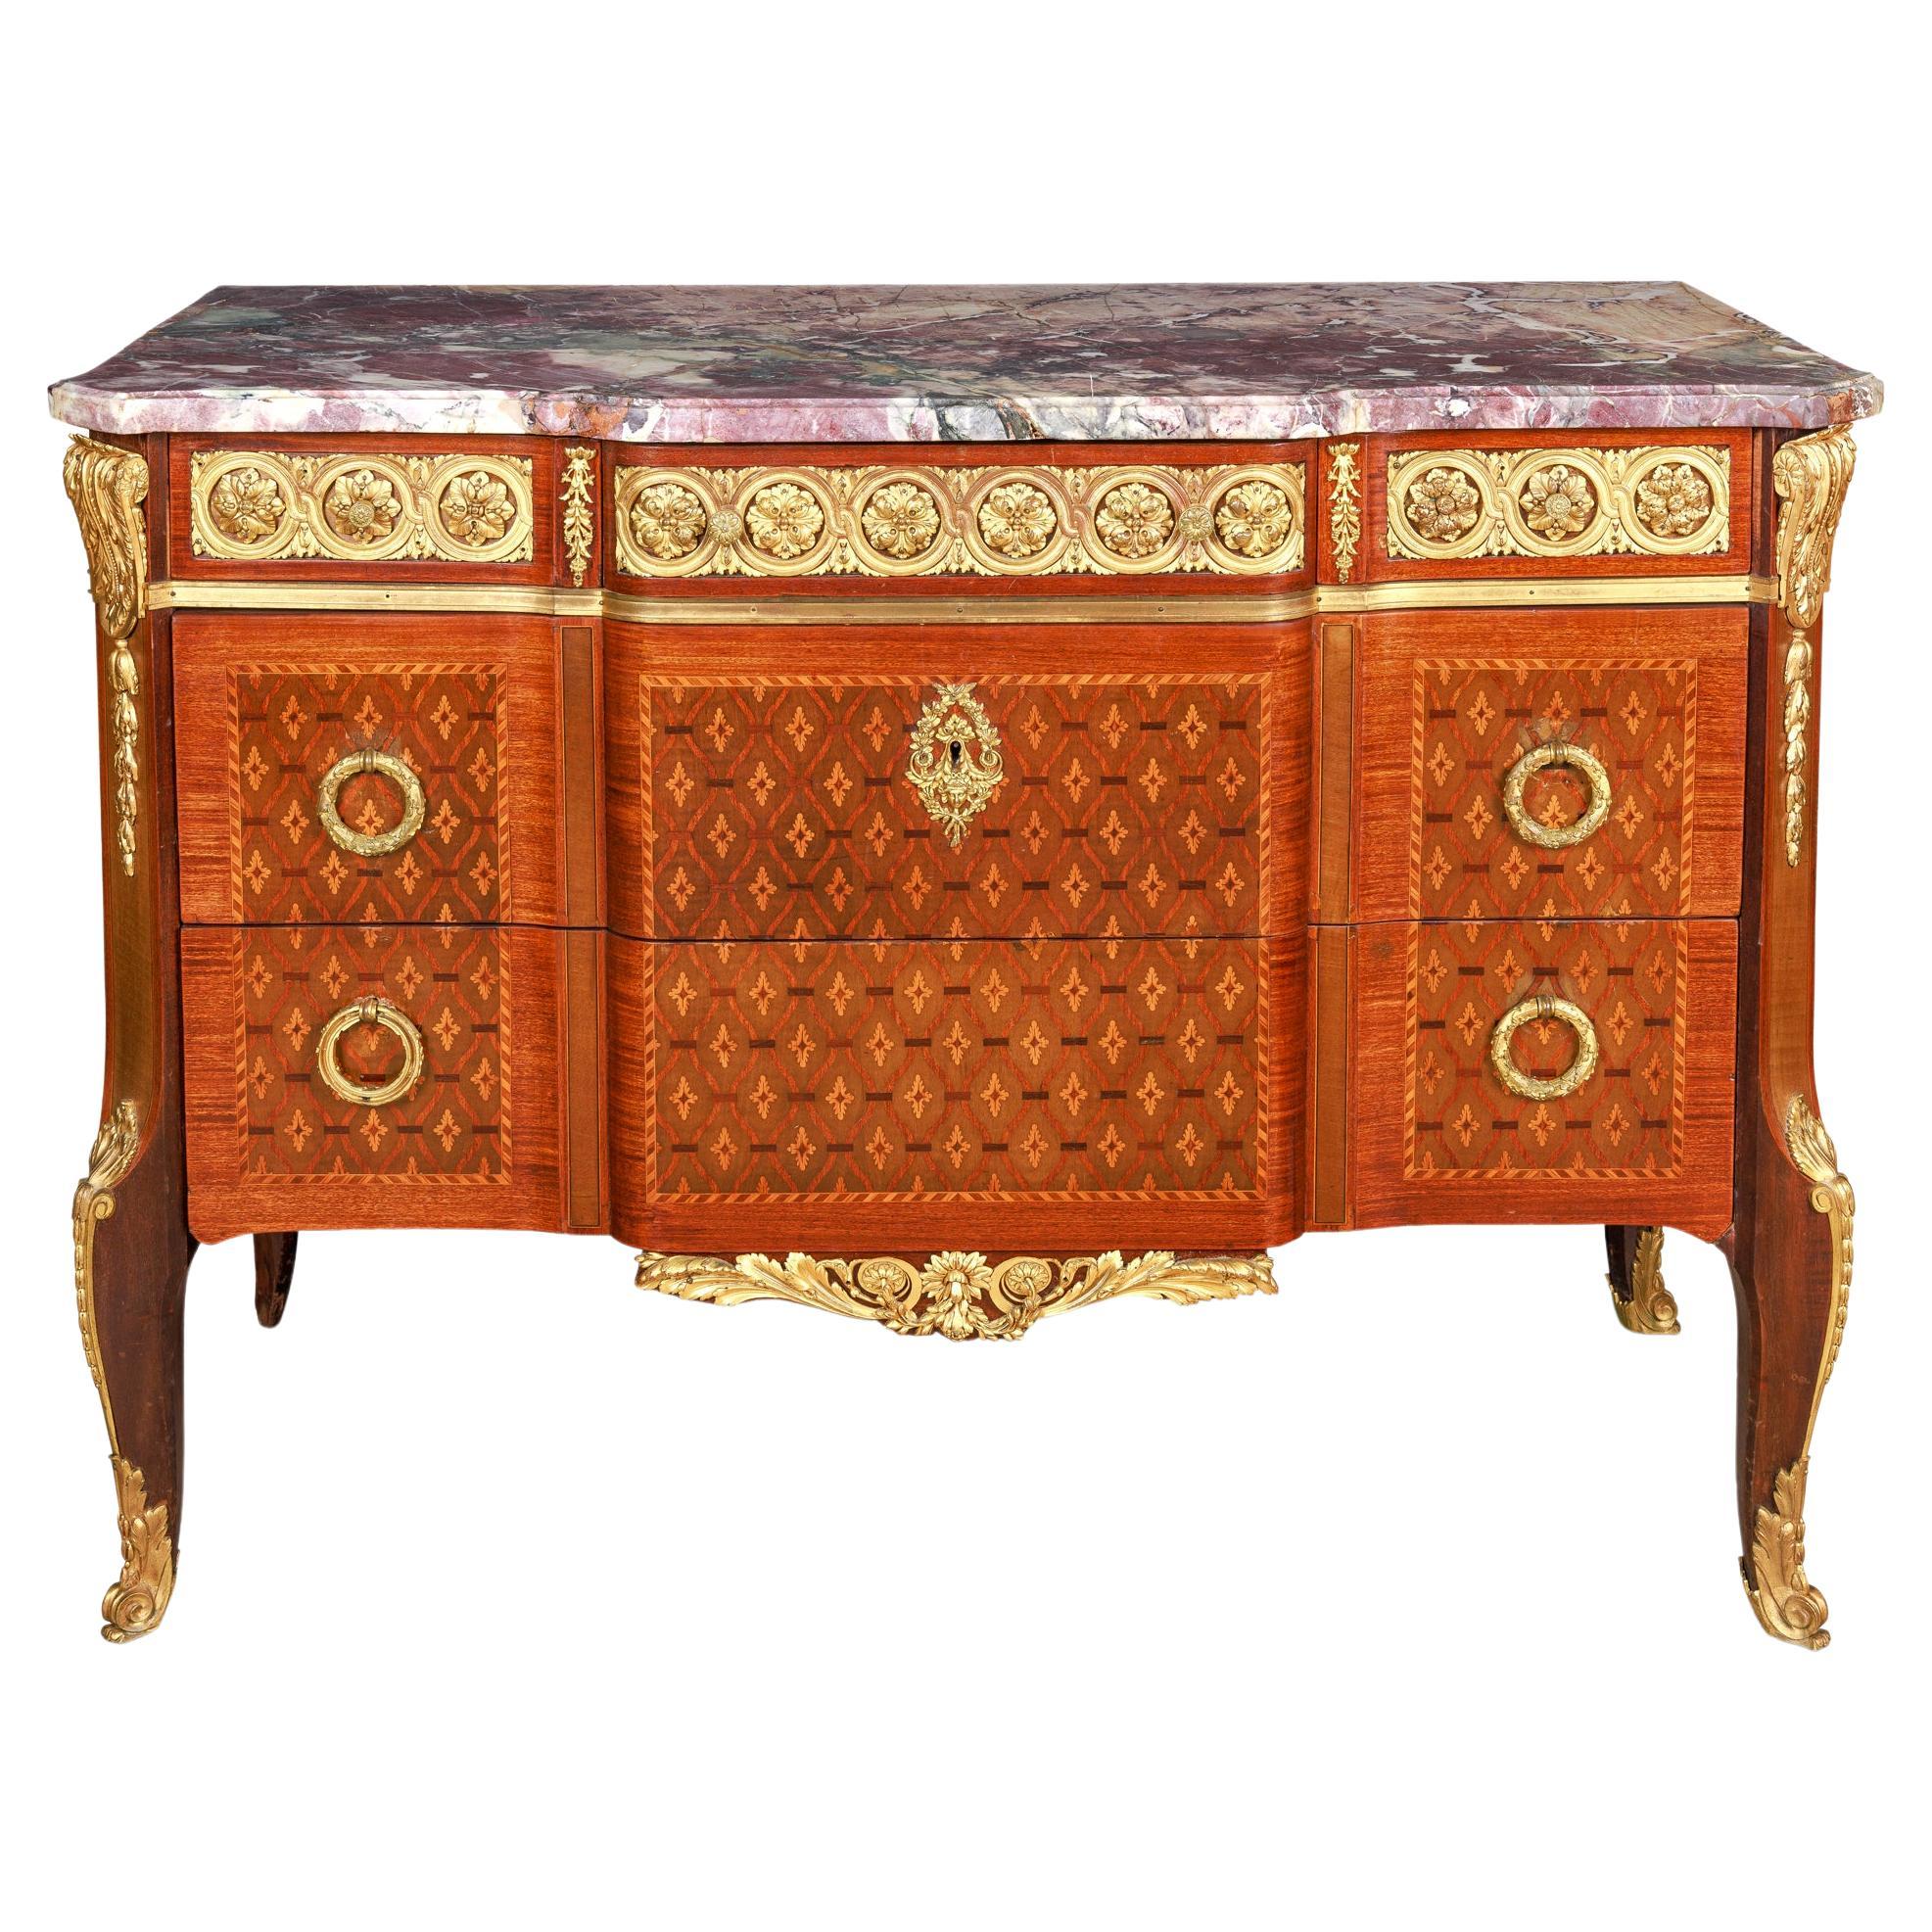 French Louis XVI Style Ormolu-Mounted Marquetry and Parquetry Commode For Sale